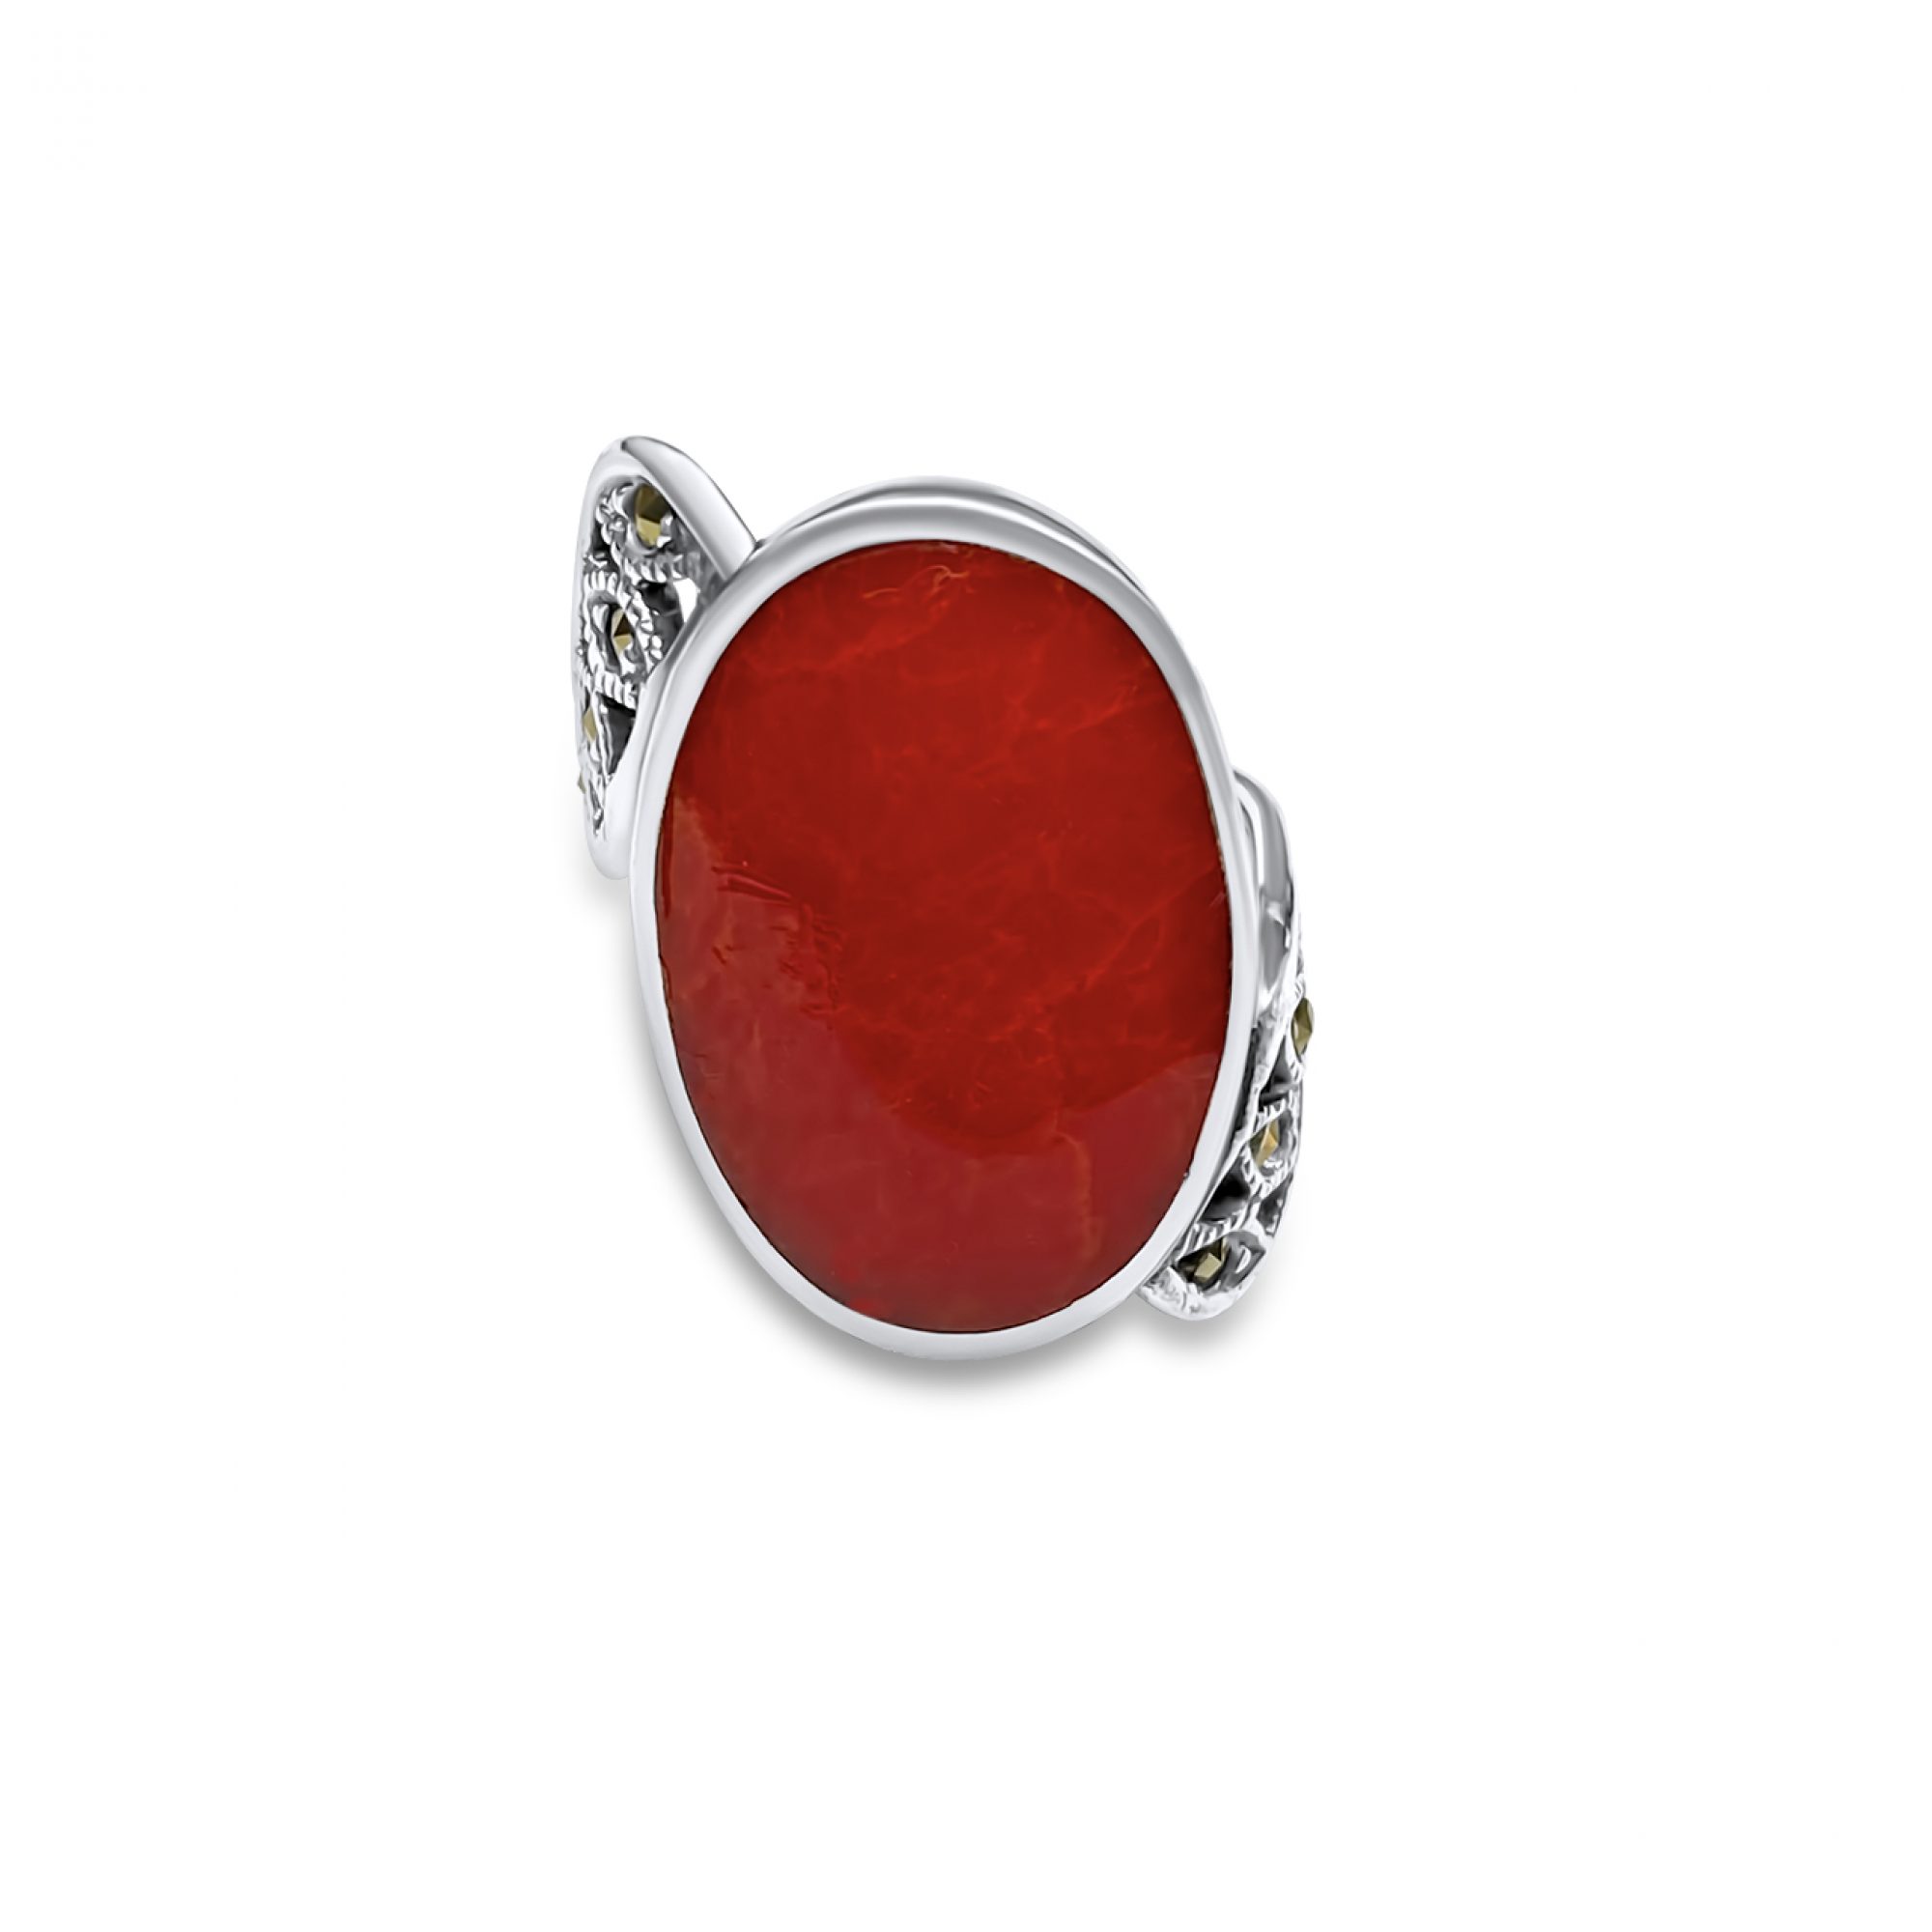 Ring with coral stone and marcasites